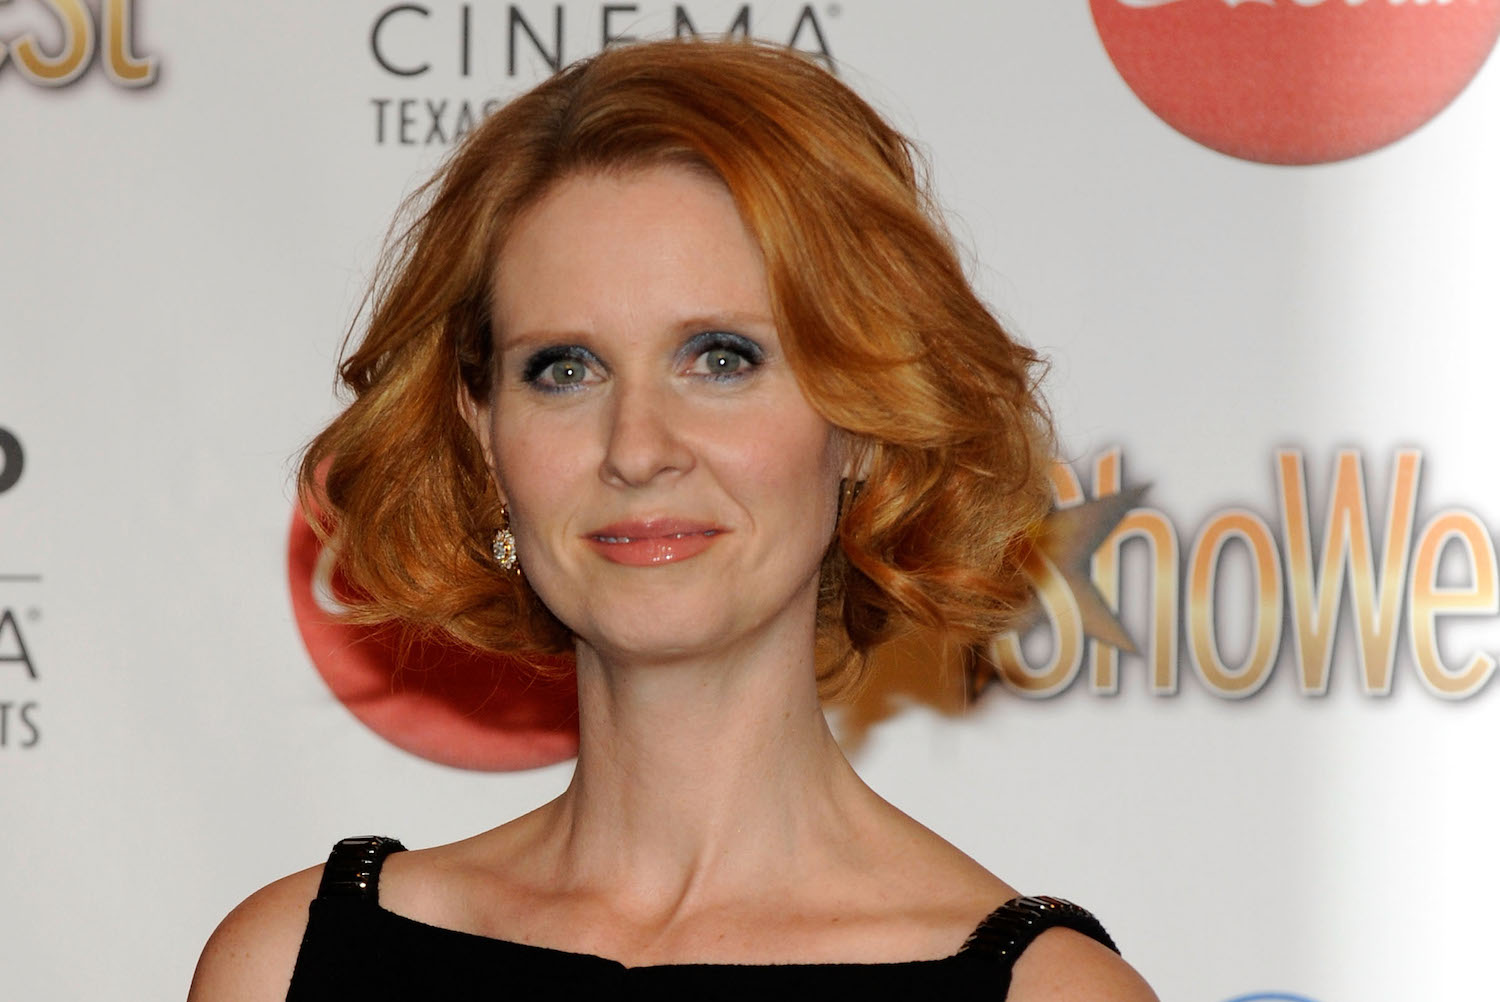 Sex and the City star Cynthia Nixon has clarified comments she made when sh...